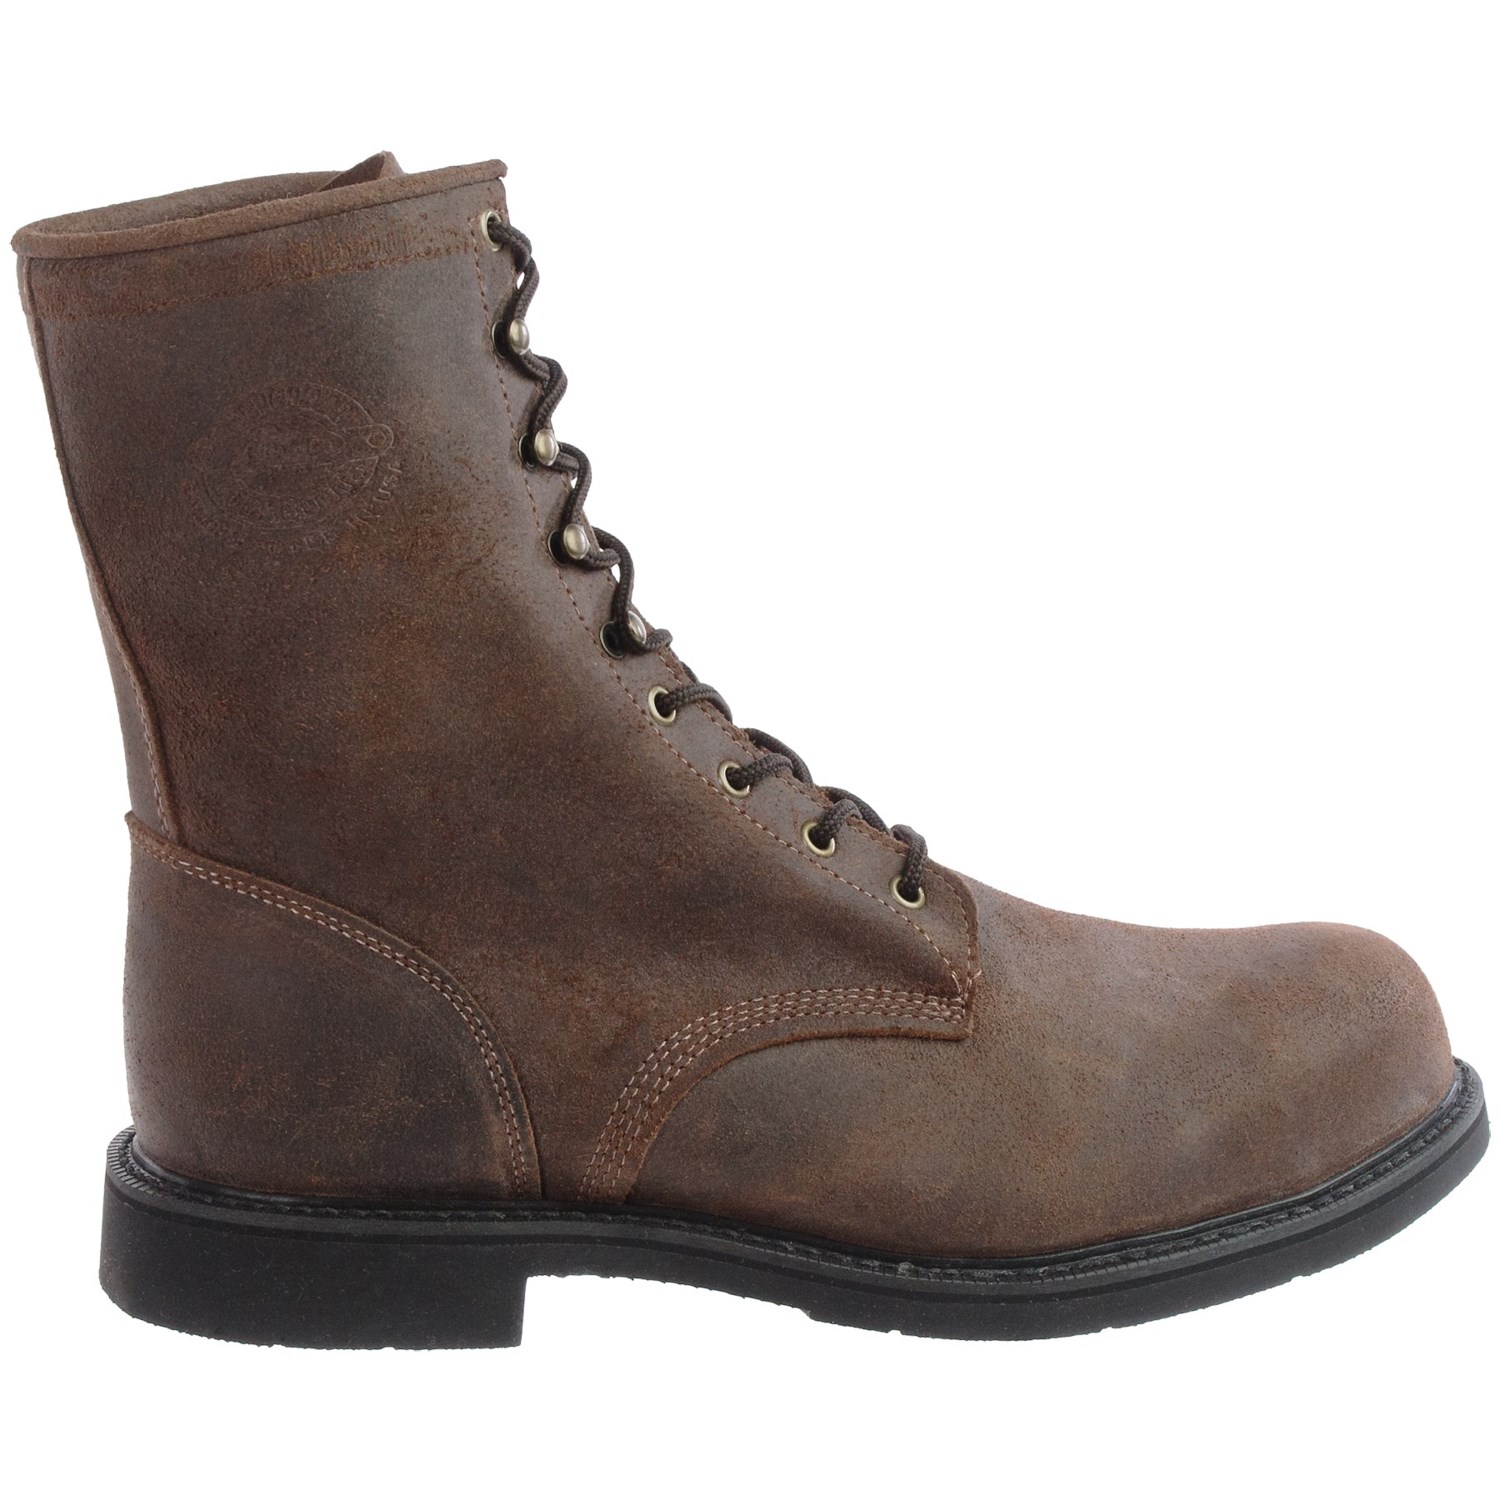 Justin Boots Dark Mountain Leather Work Boots (For Men) - Save 53%